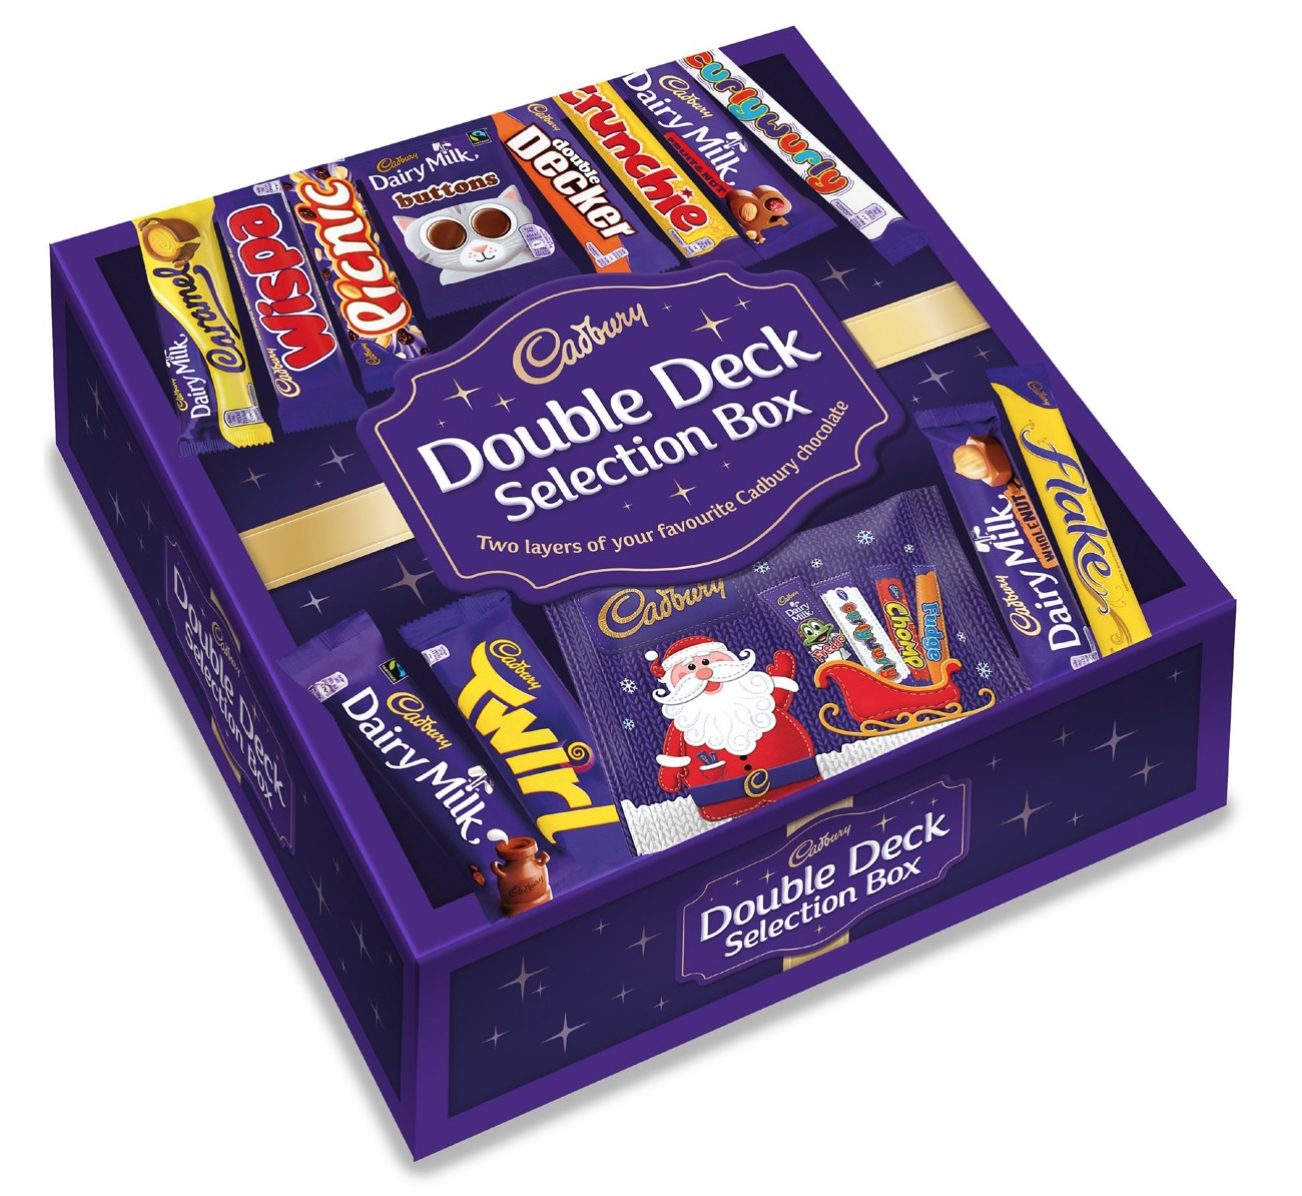 Novel Double-Size Selection Box from Cadbury Gift Direct by Dr Kathleen Thompson ...